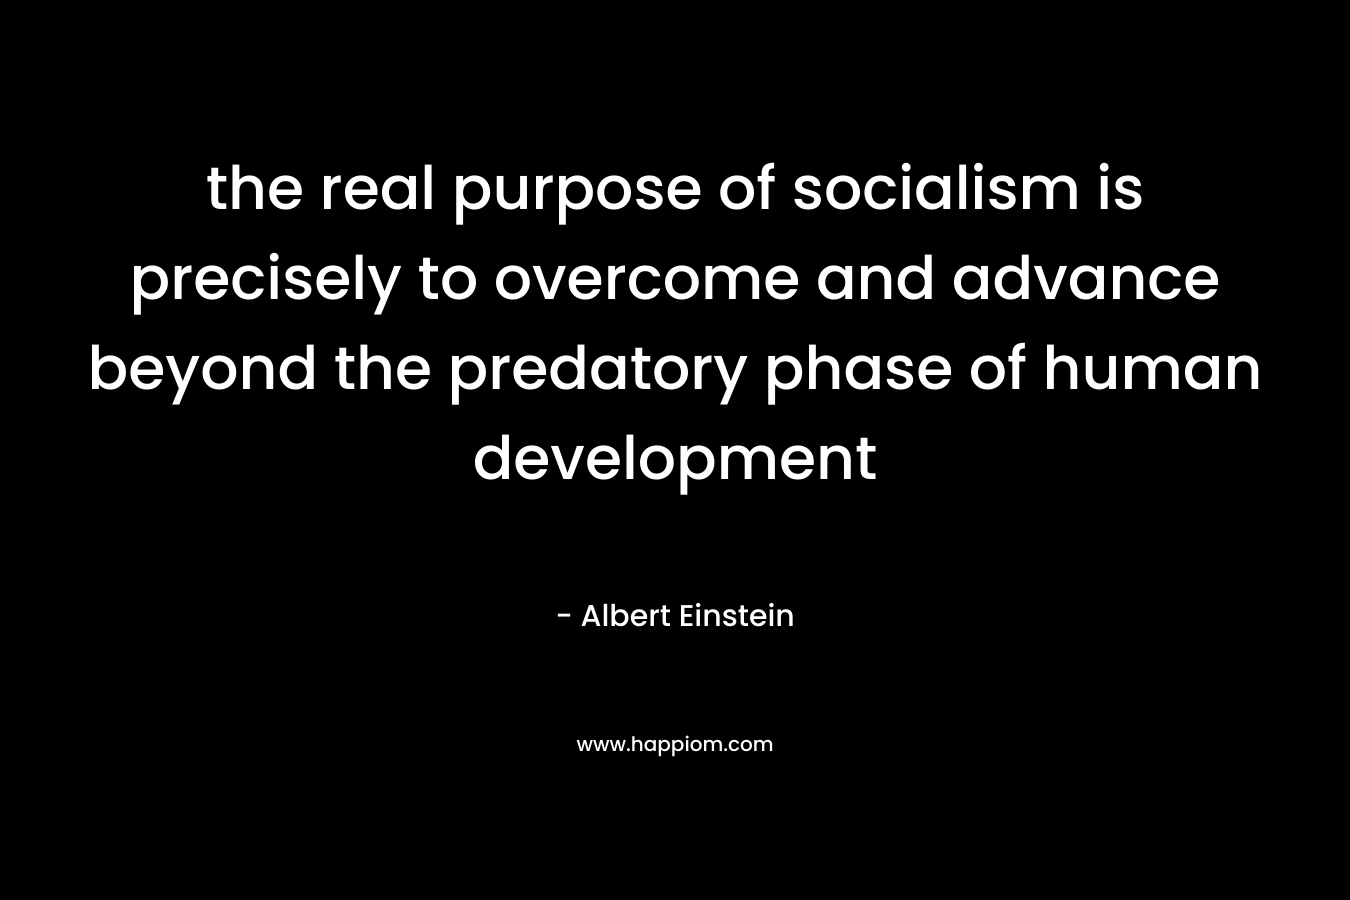 the real purpose of socialism is precisely to overcome and advance beyond the predatory phase of human development